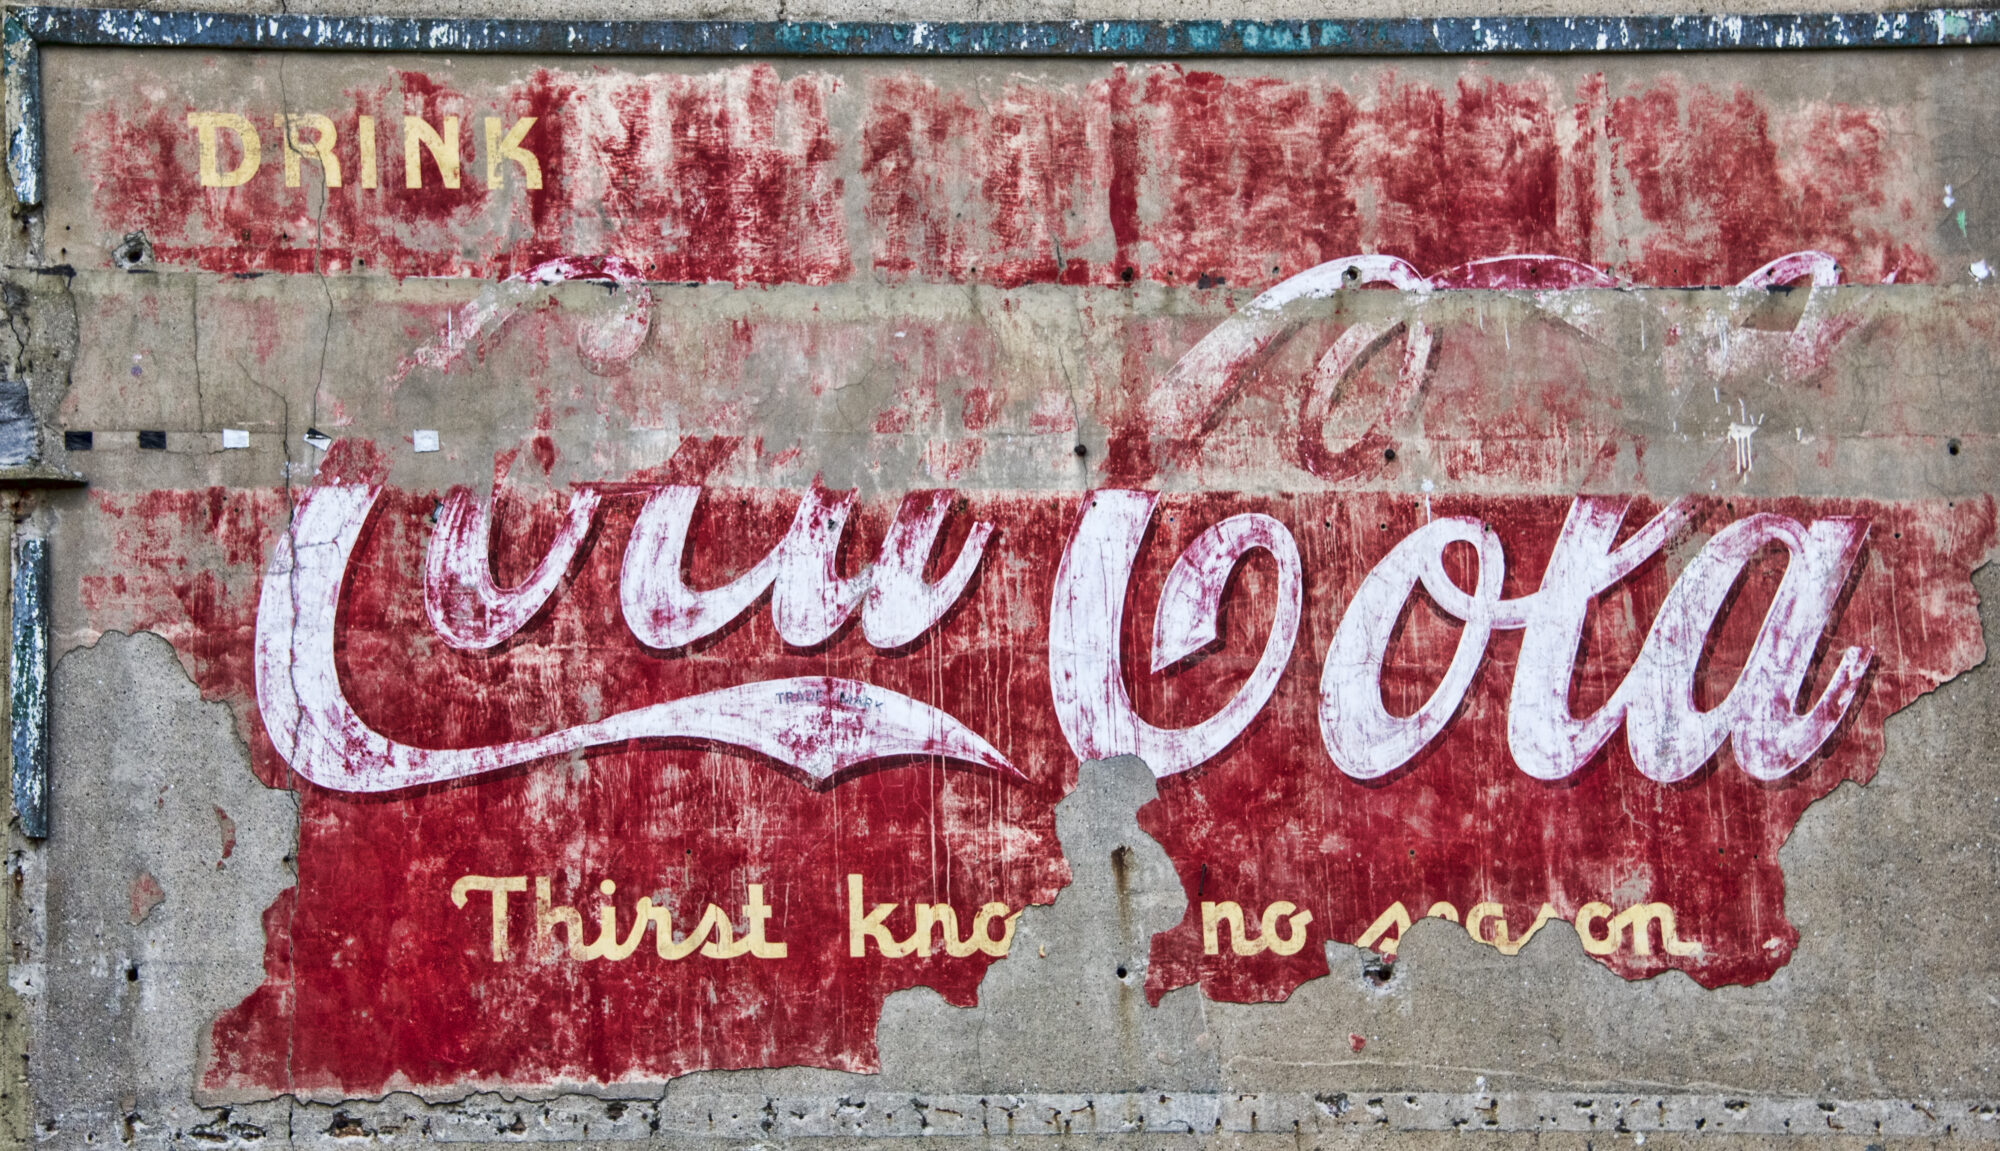 Thurs 17th September | 5-9pm
Book your free ticket now for the Ghost Signs Conference with speakers from across Britain and Ireland sharing insights and experiences of the faded historic hand painted signs and wall murals found in their cities.